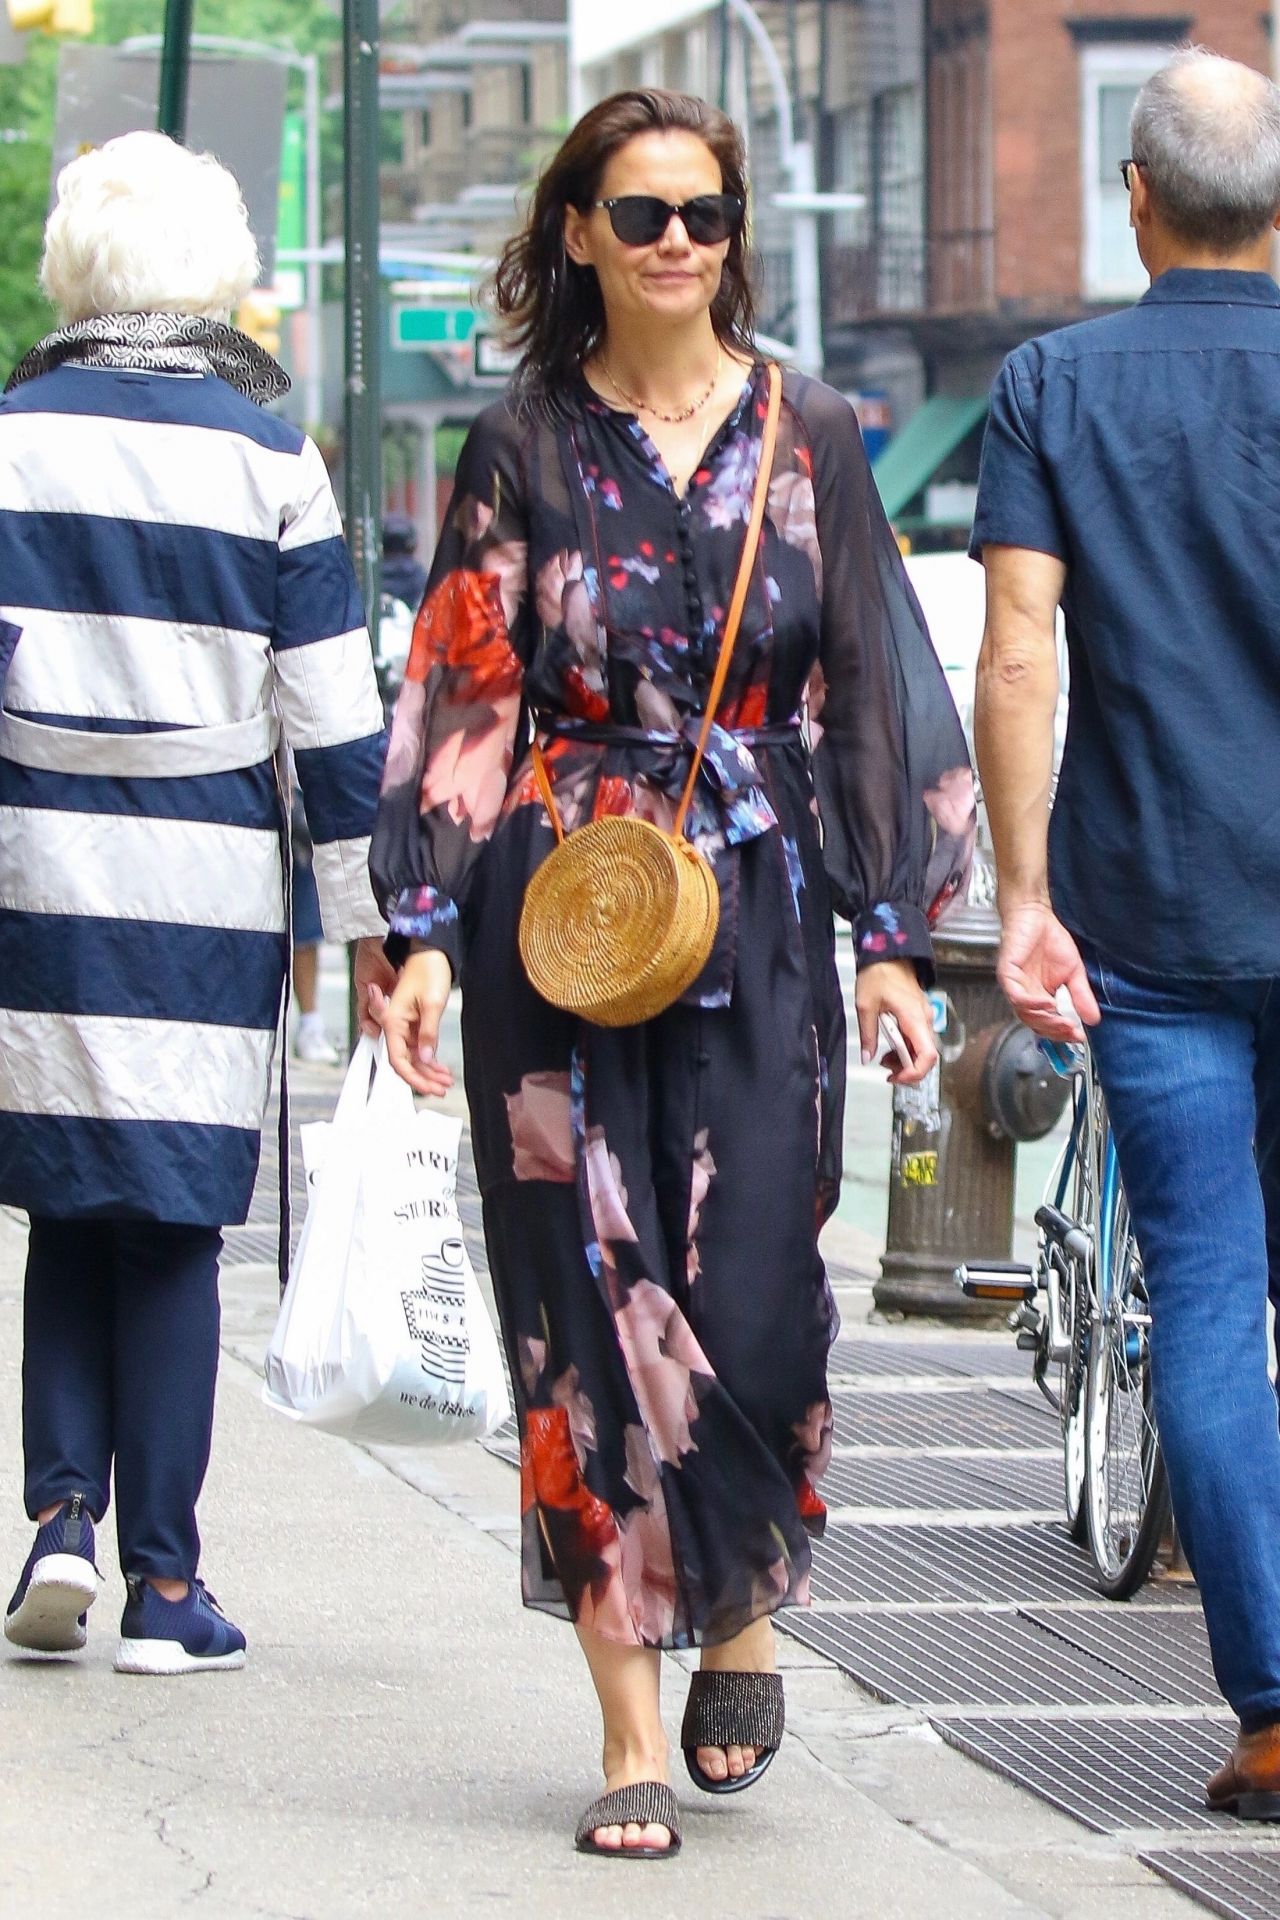 katie-holmes-out-in-nyc-5-28-2019-6.jpg